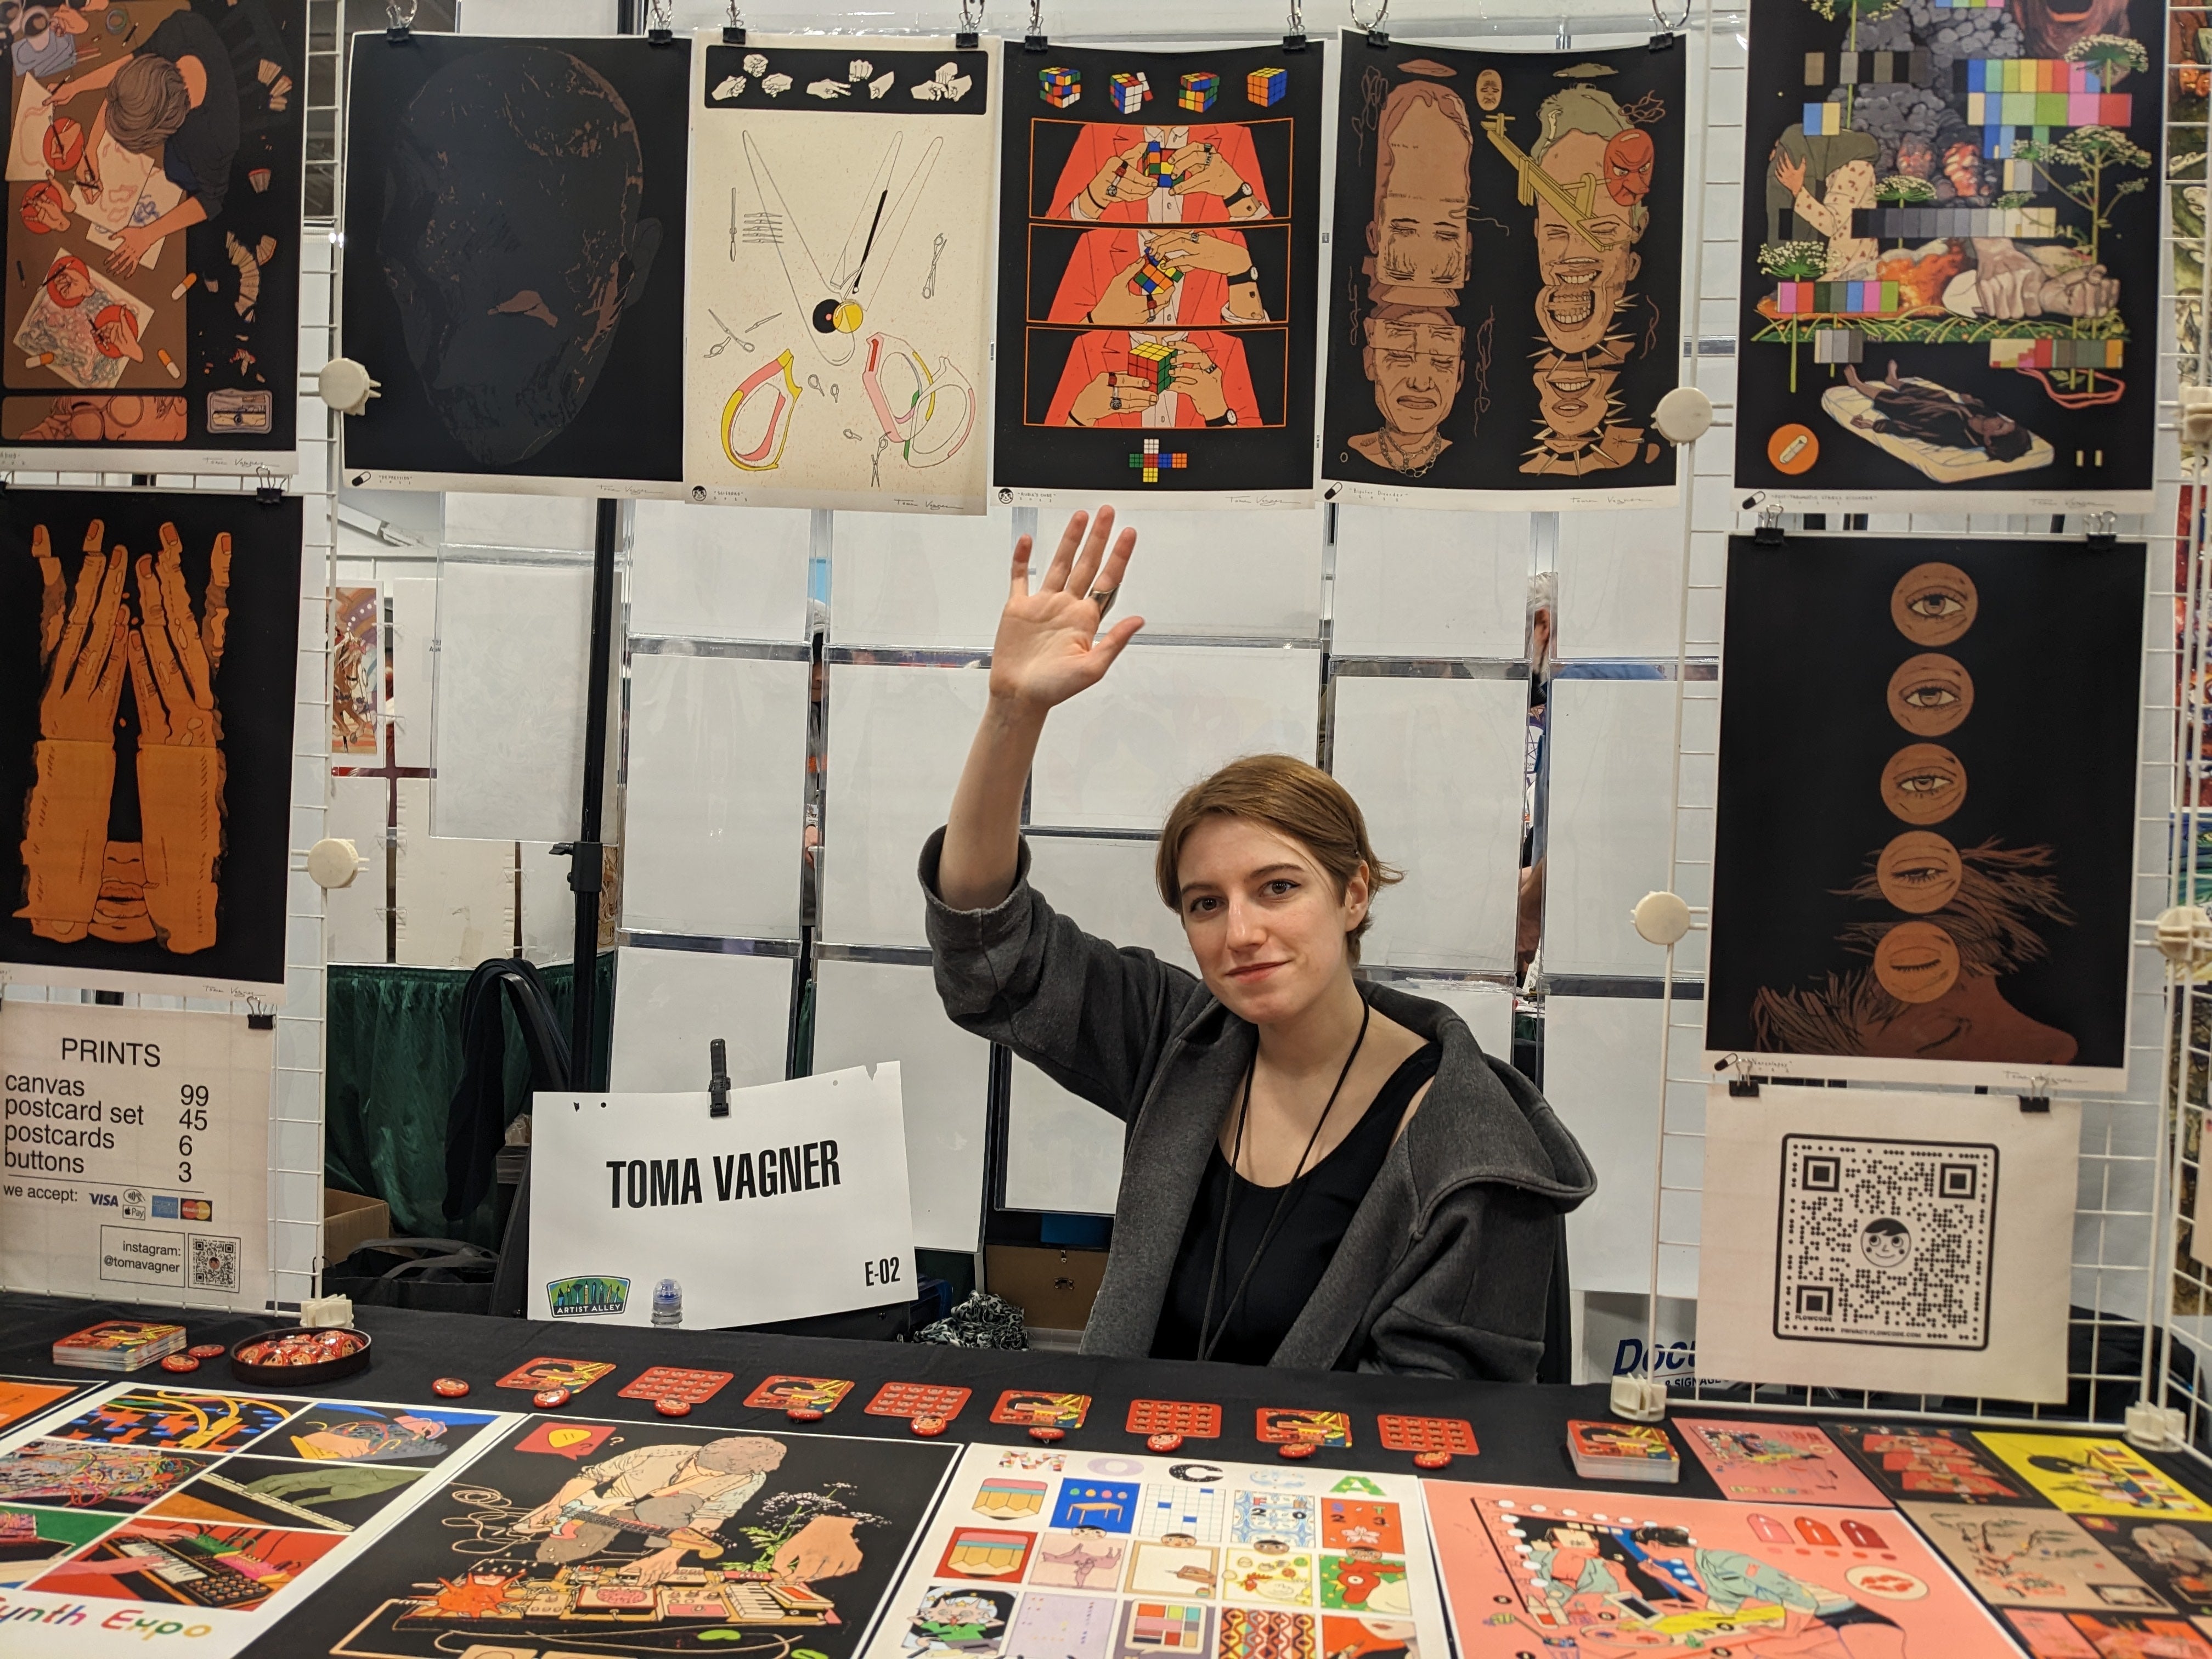 Photograph of artist in her booth with her hand raised